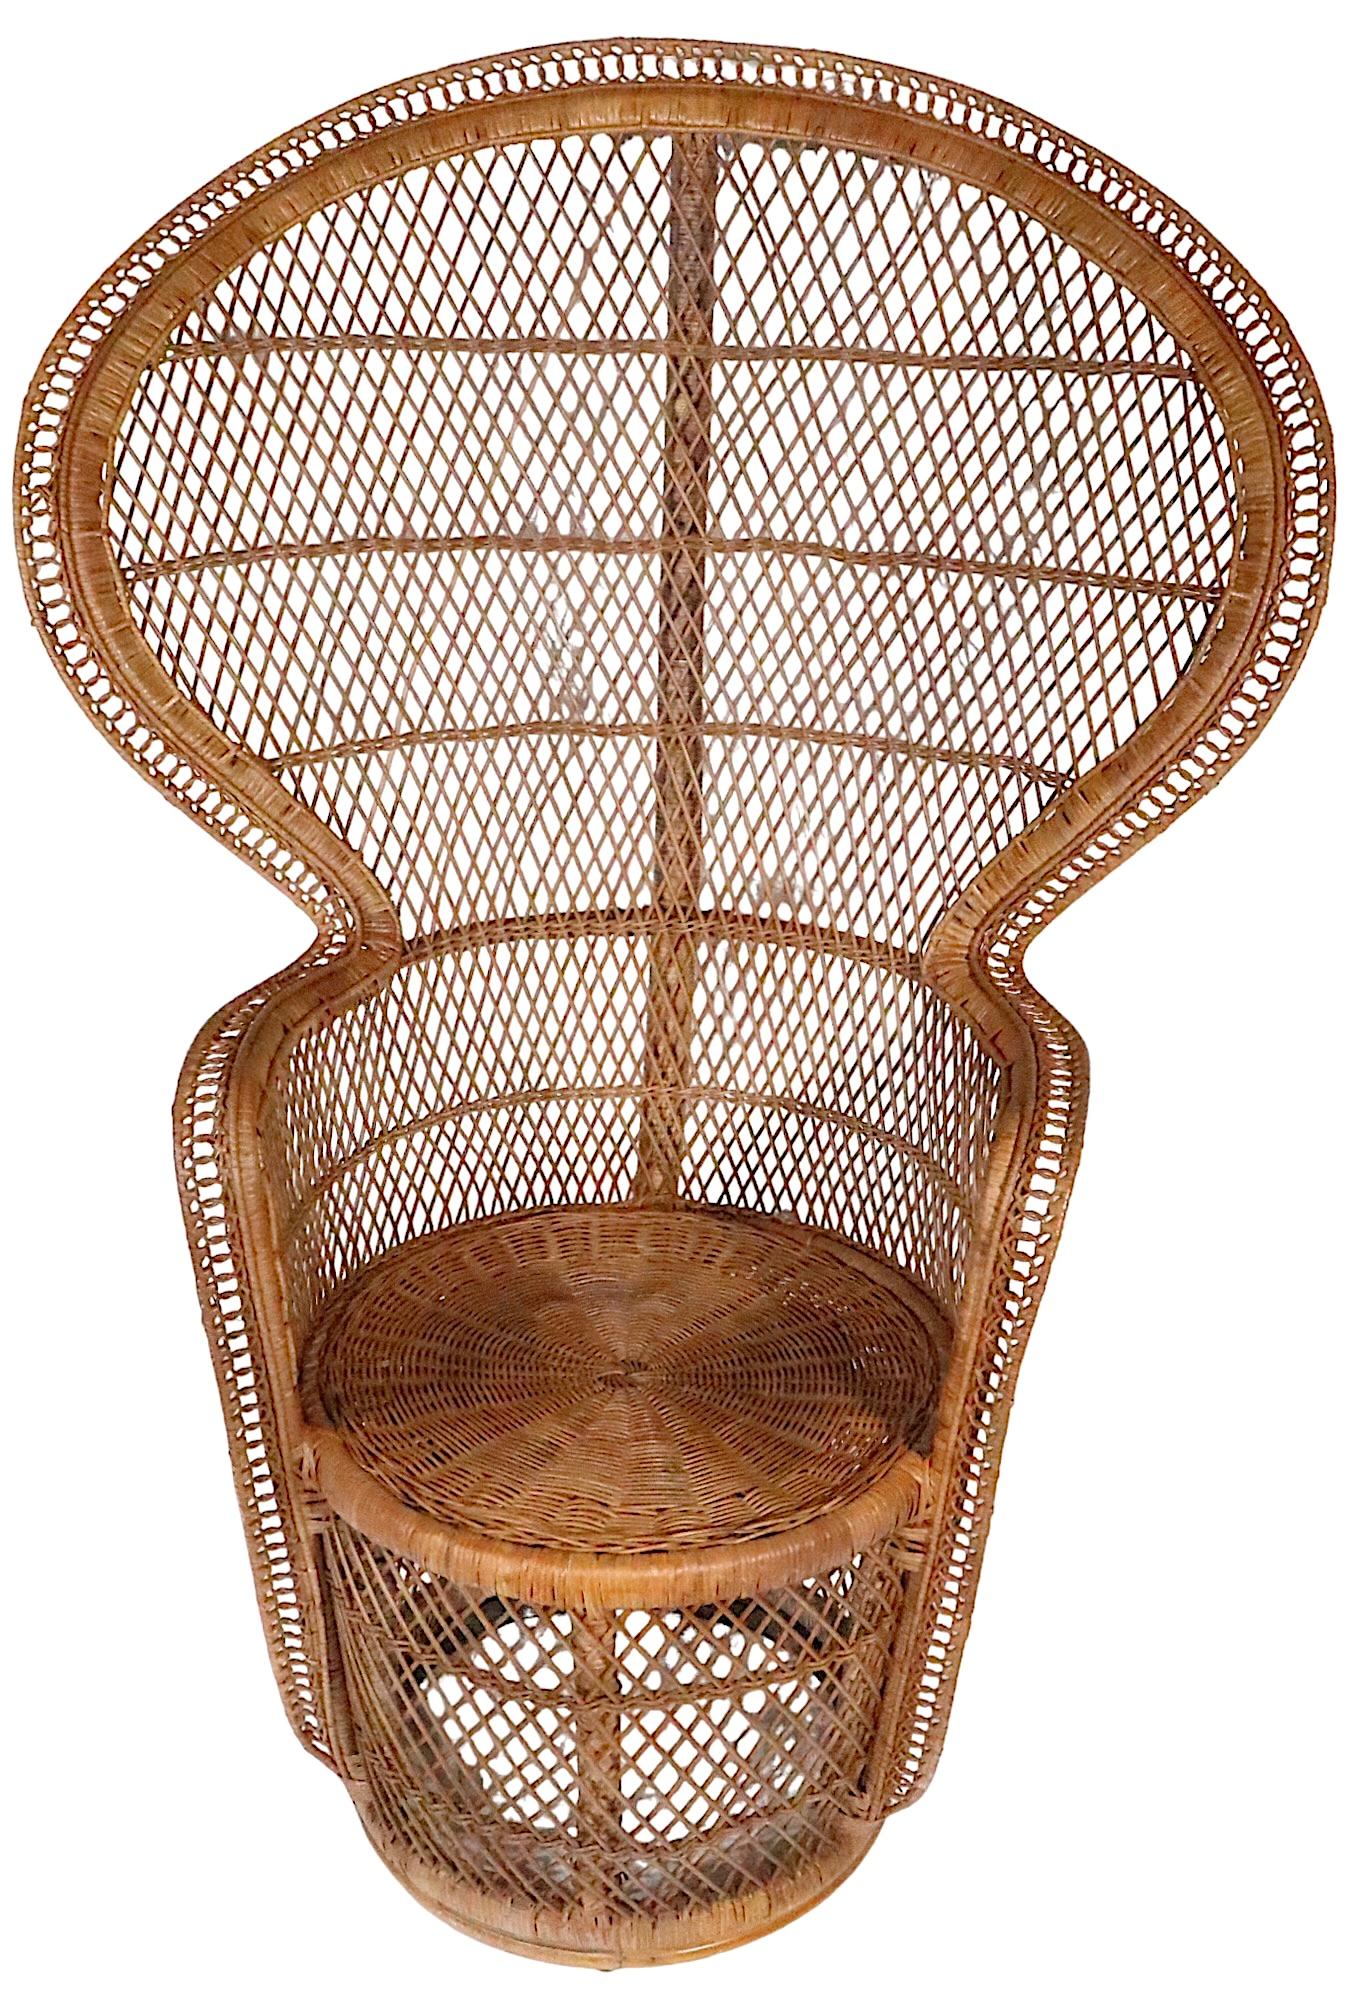 Pr. Vintage Emanuelle Peacock Woven Wicker  Chairs c. 1970's For Sale 9